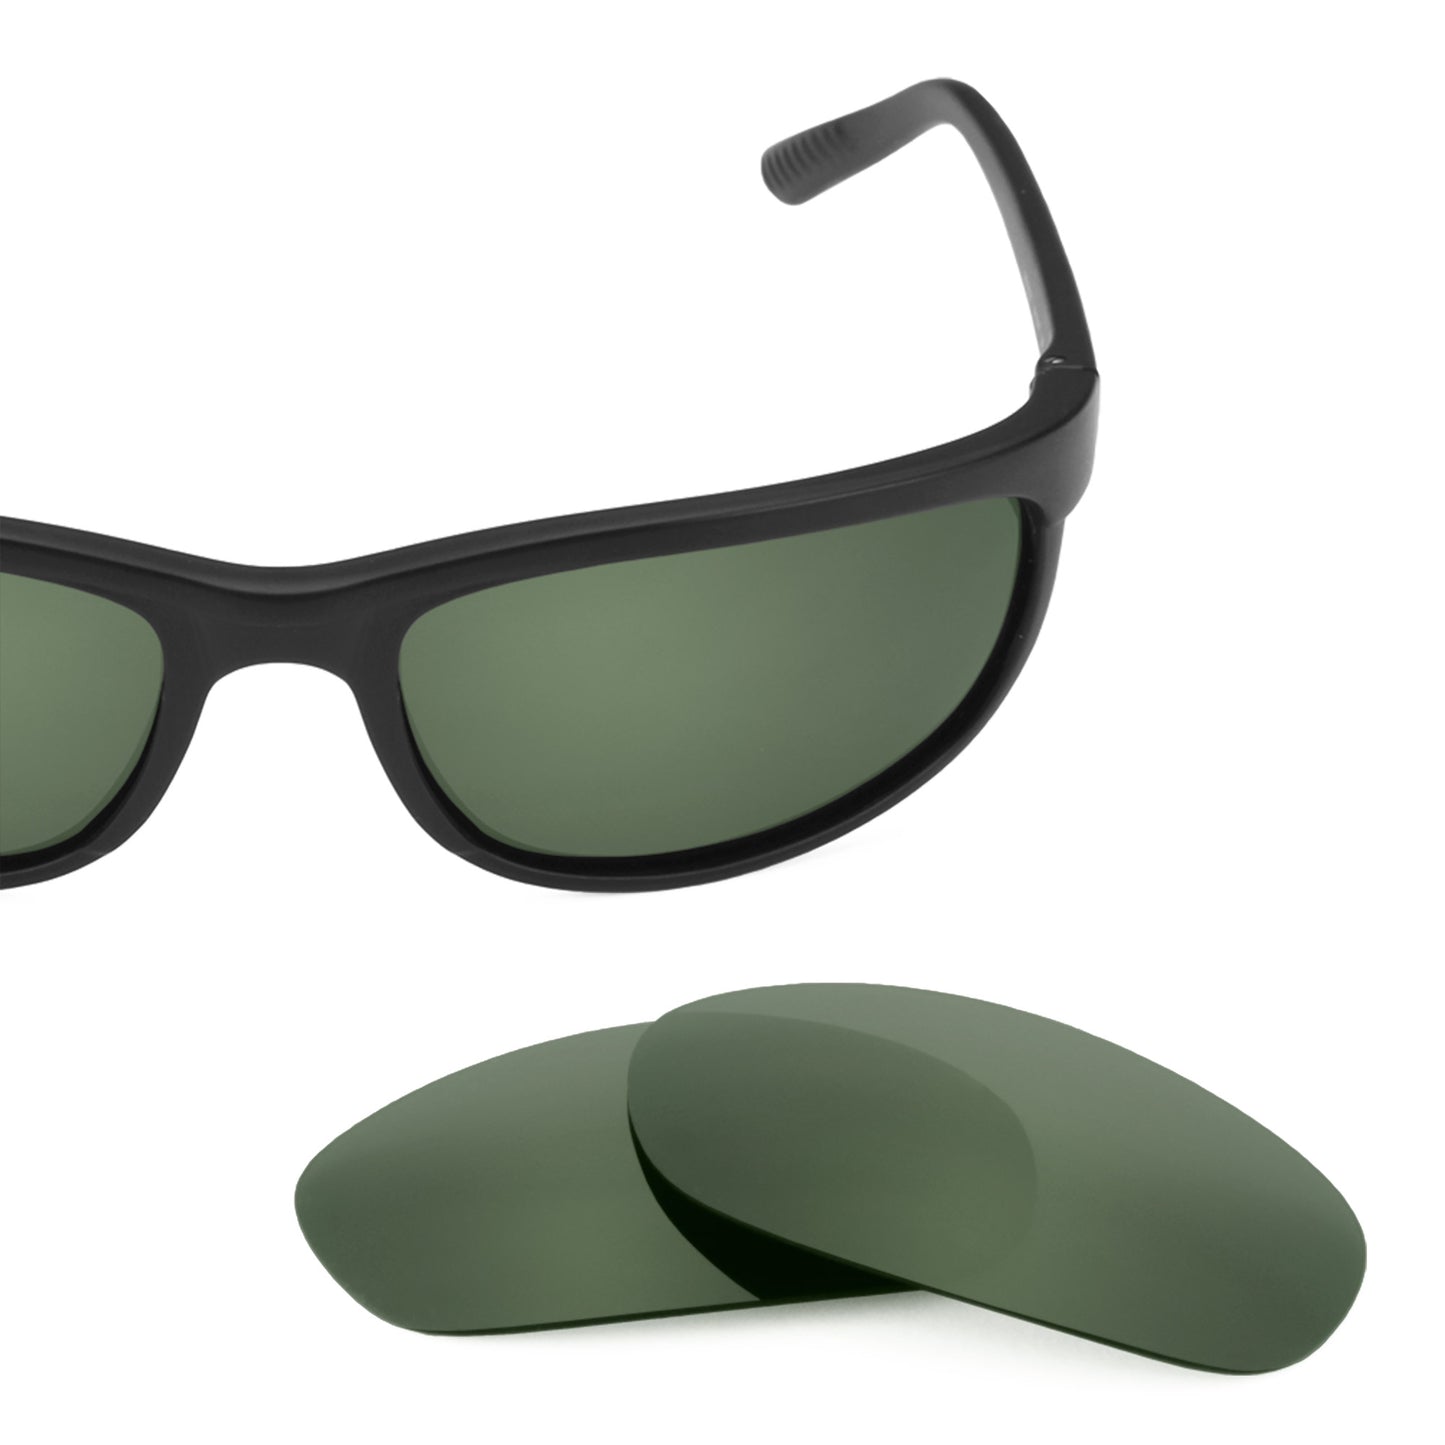 Revant replacement lenses for Ray-Ban Predator 2 RB2027 62mm Polarized Gray Green